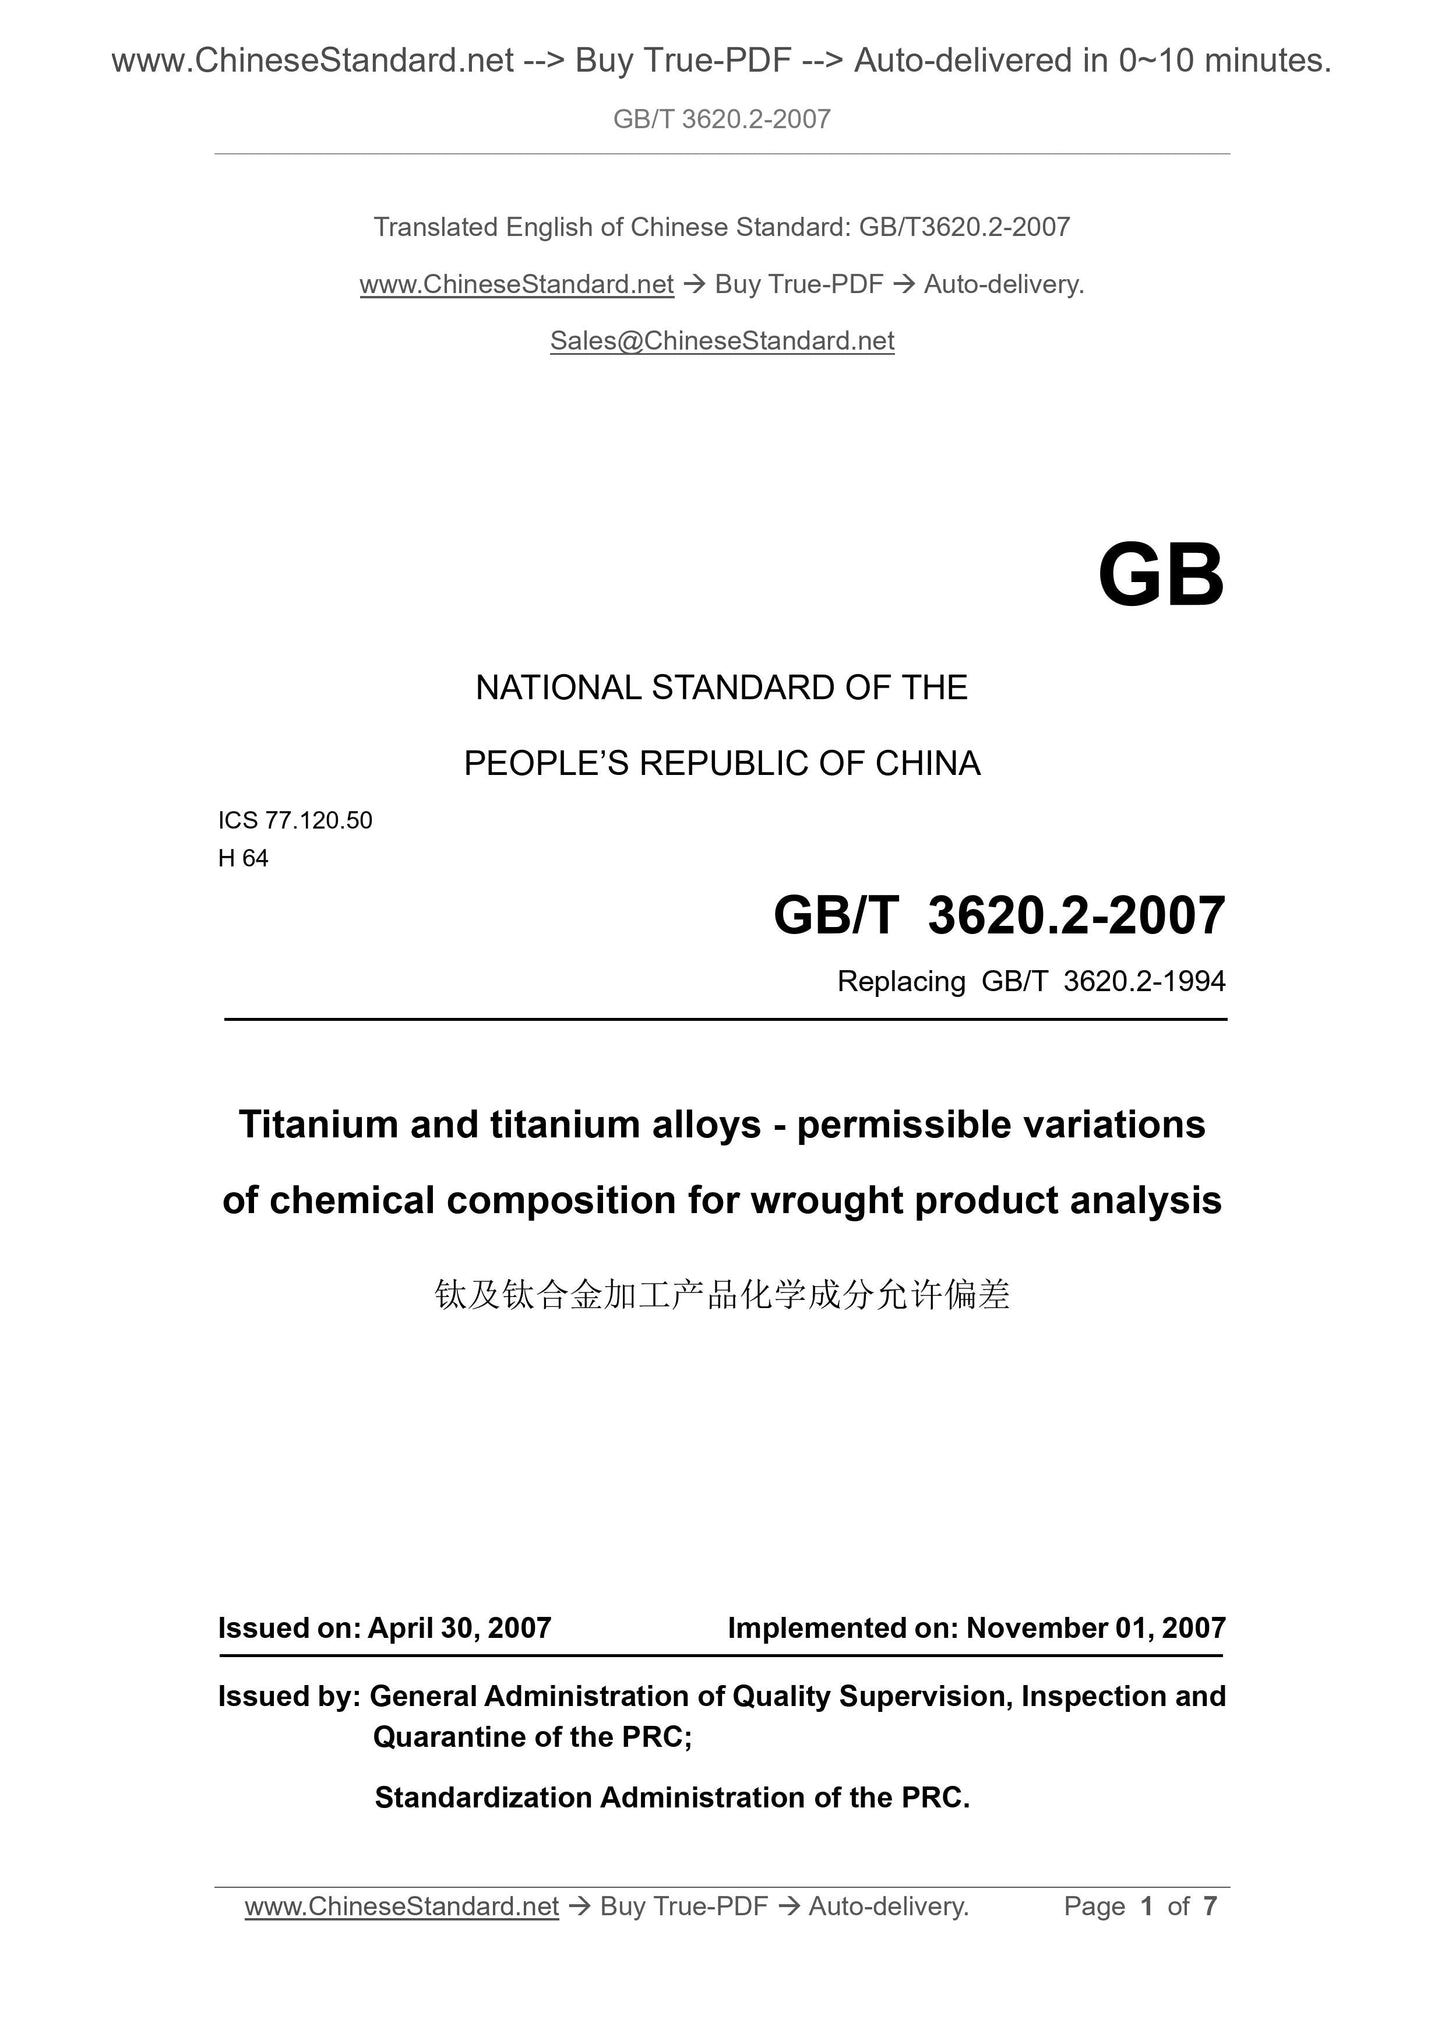 GB/T 3620.2-2007 Page 1